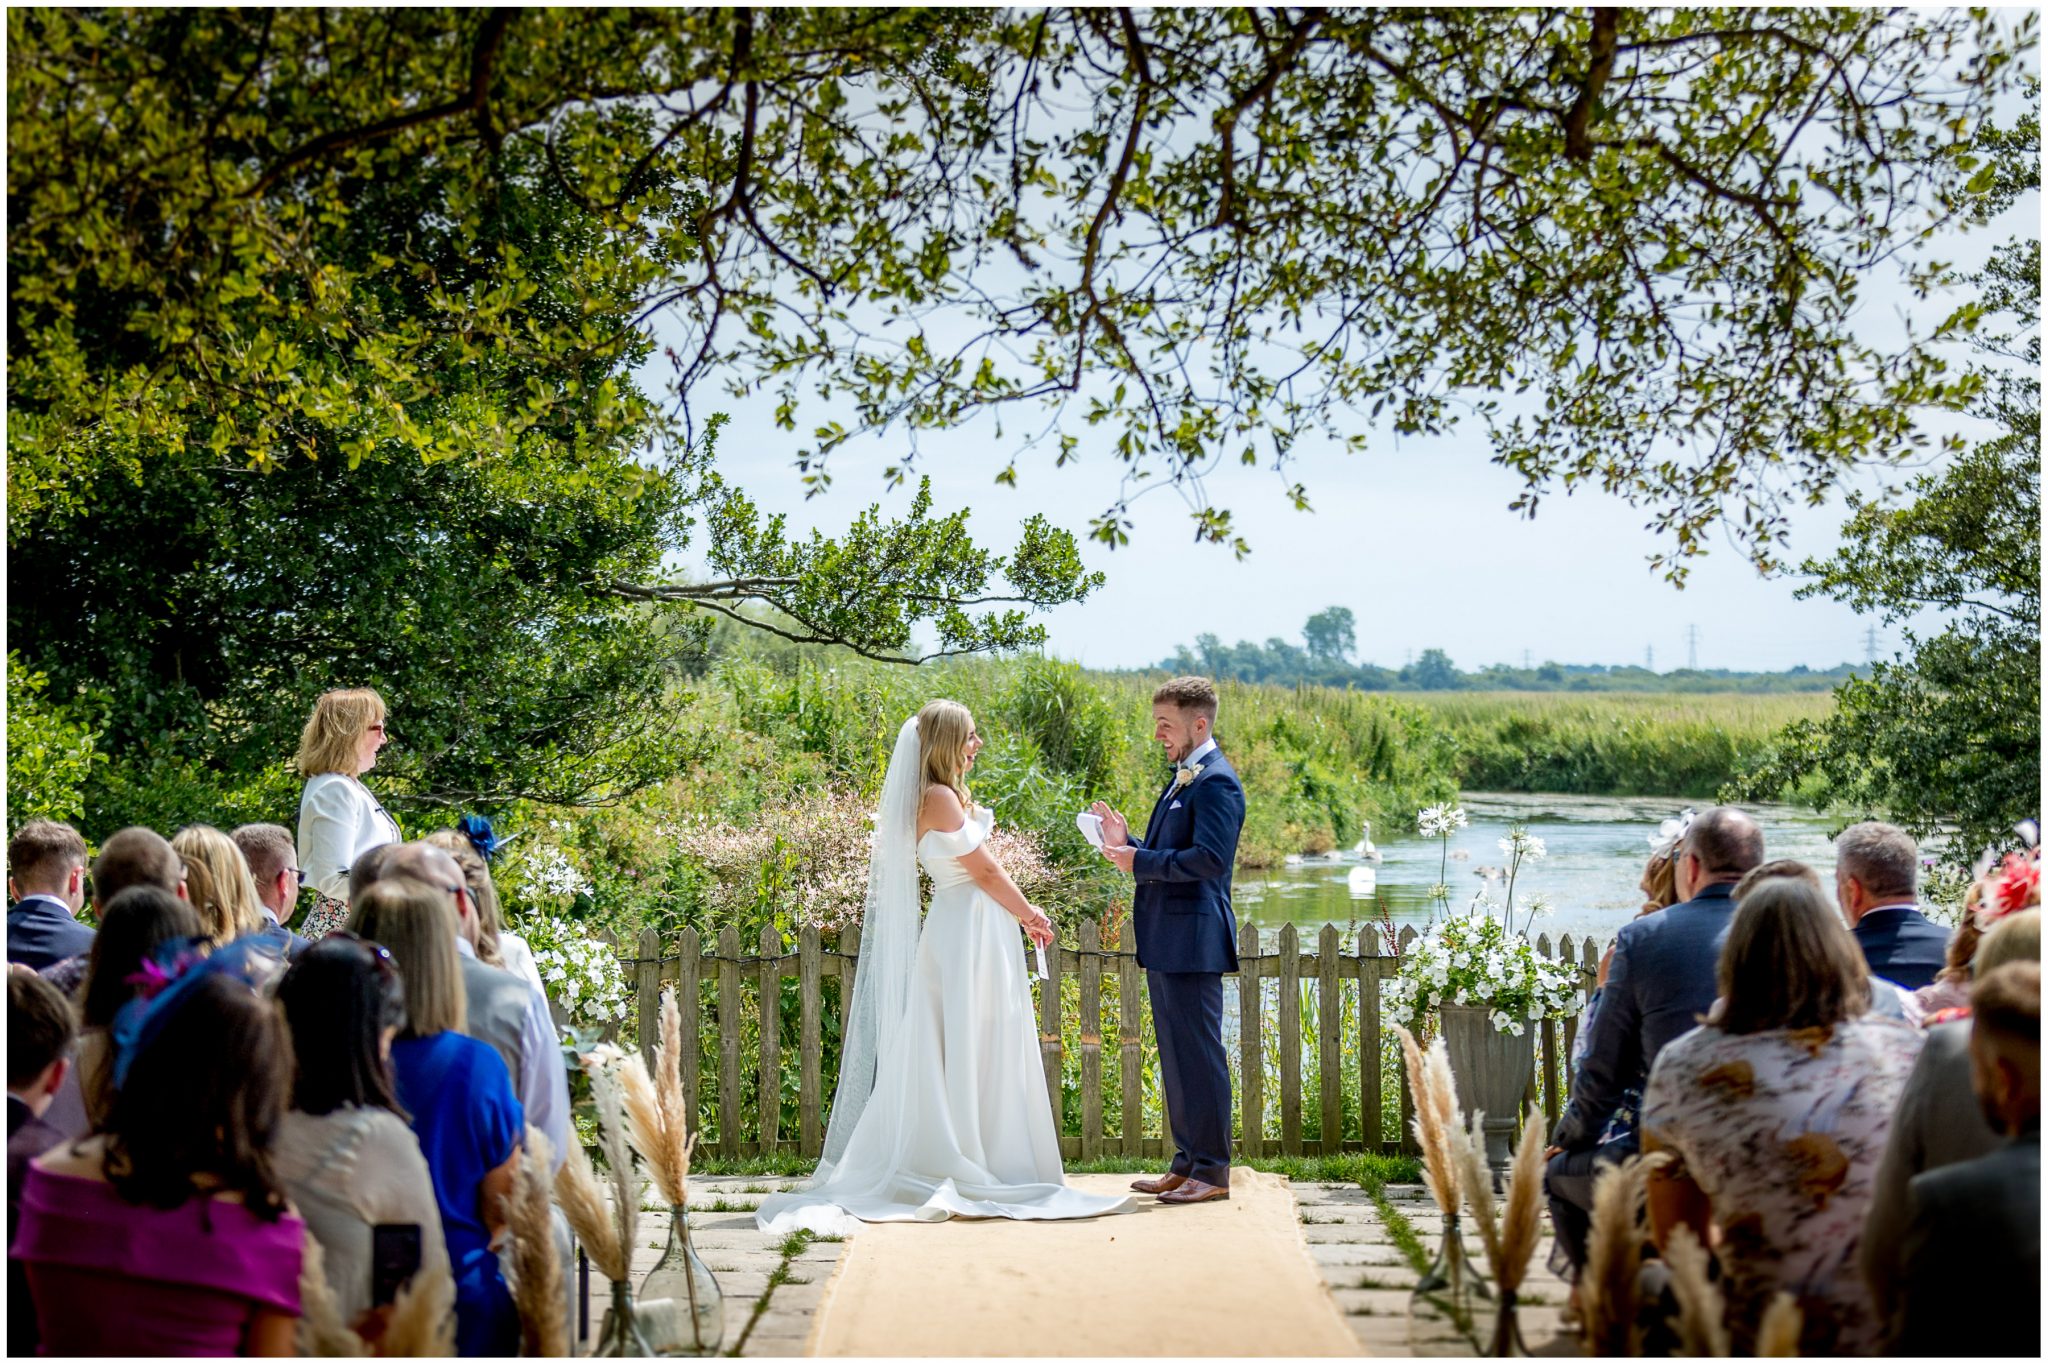 Bride and groom facing each other at the outdoor riverside ceremony setting in Dorset